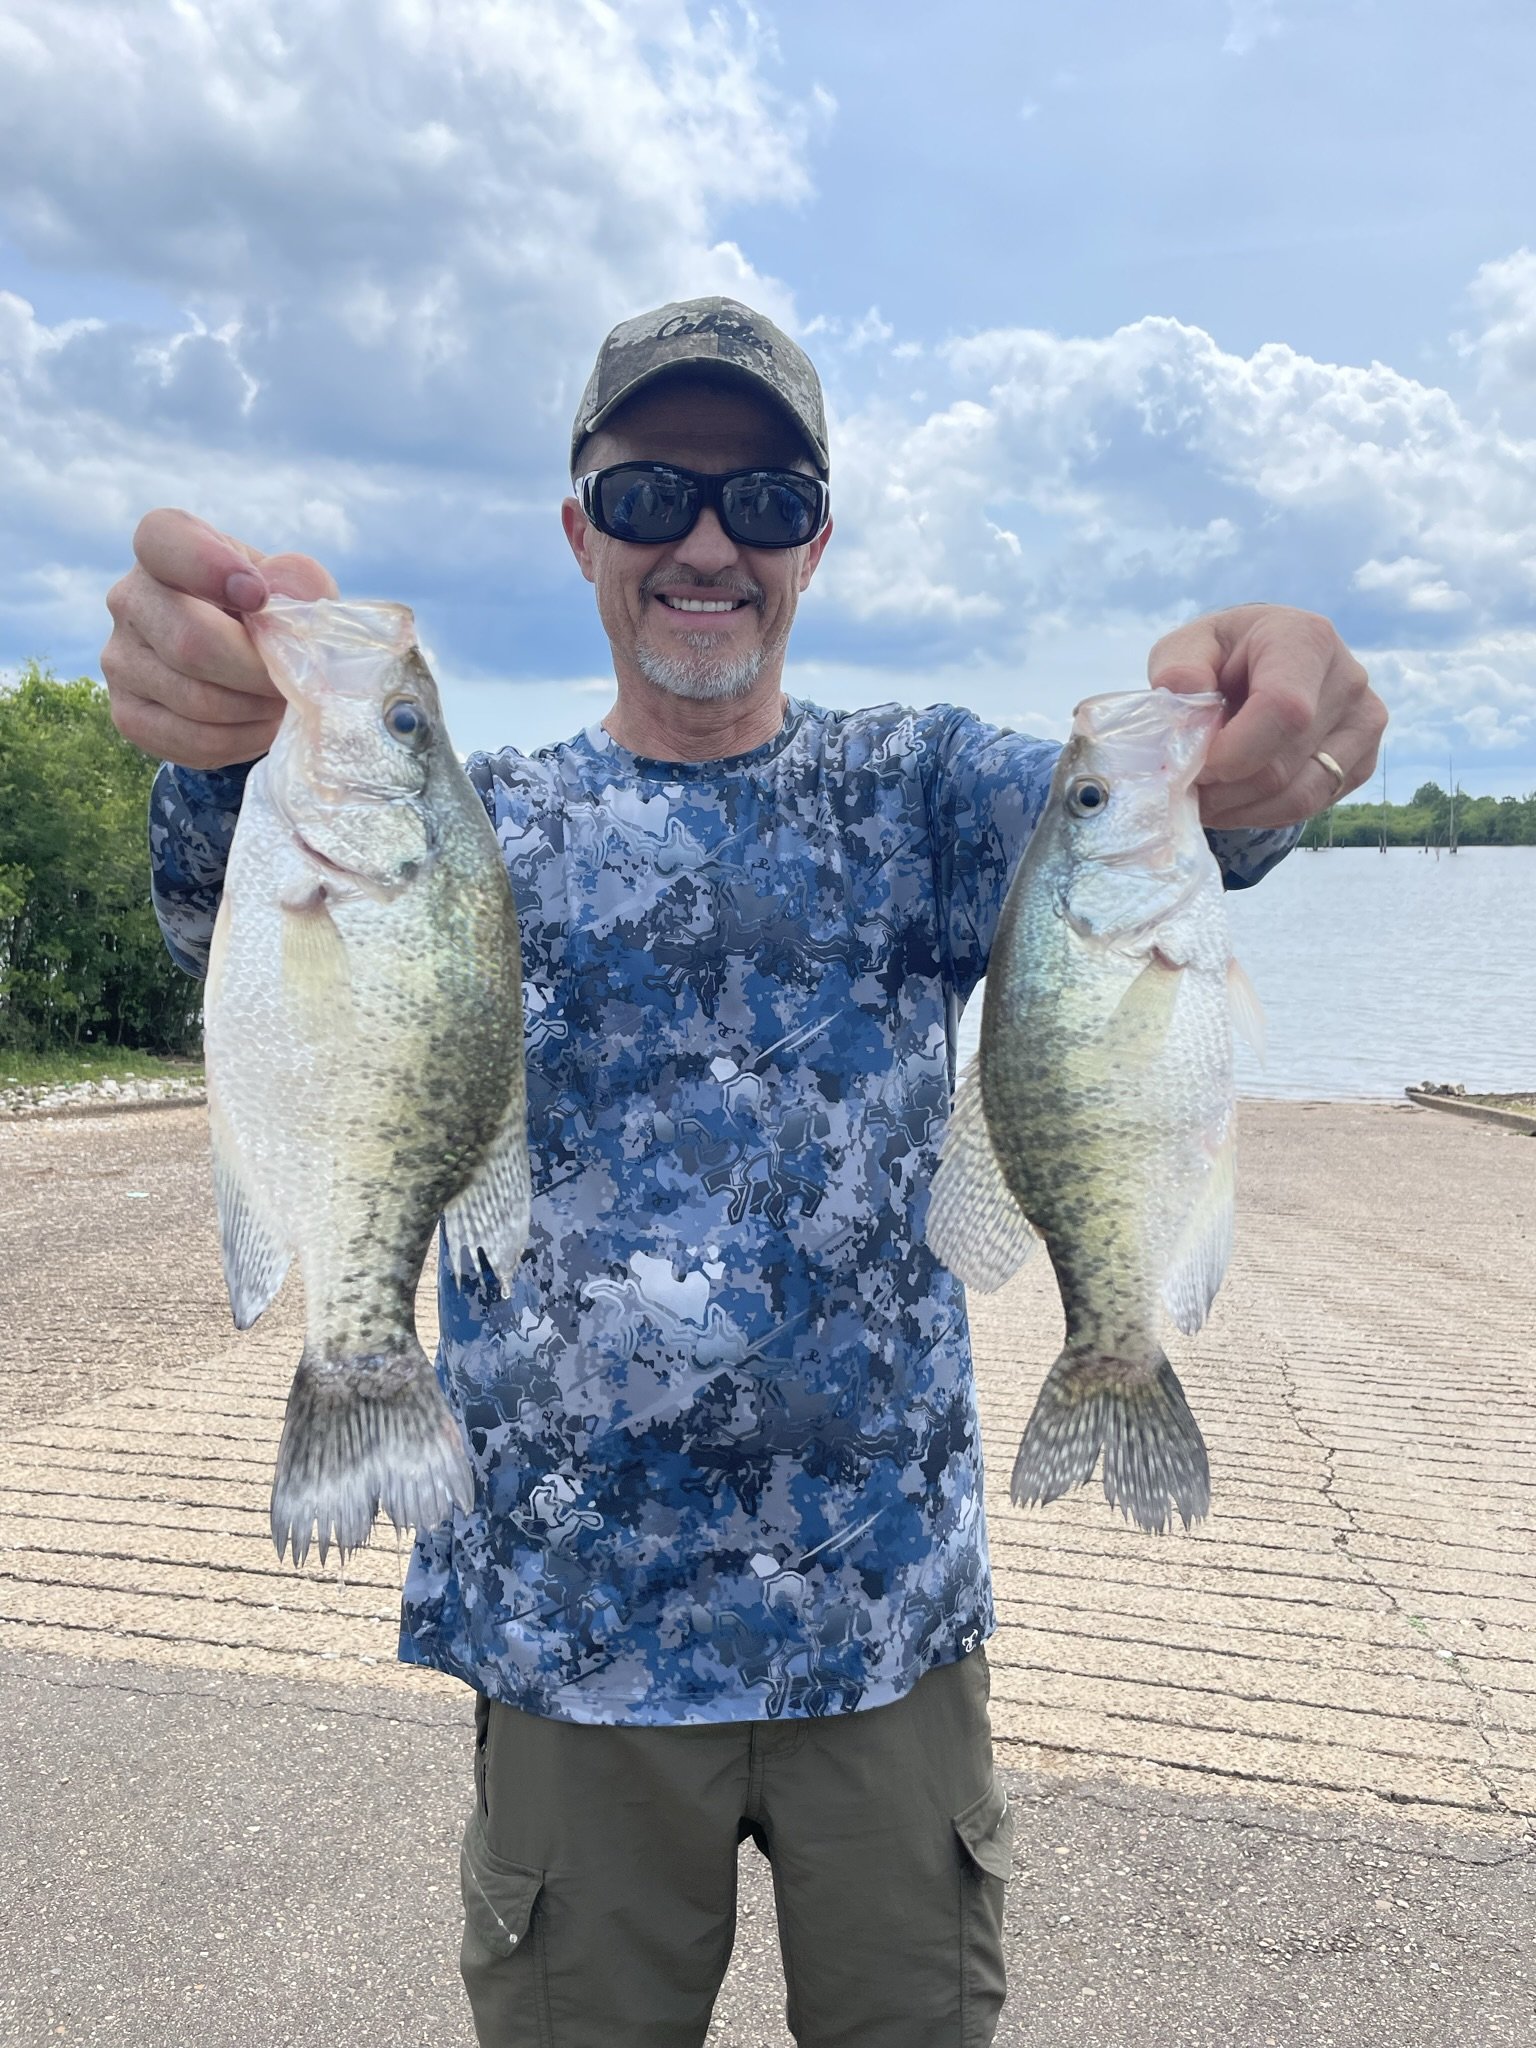 Top 5 Mississippi state lakes for crappie